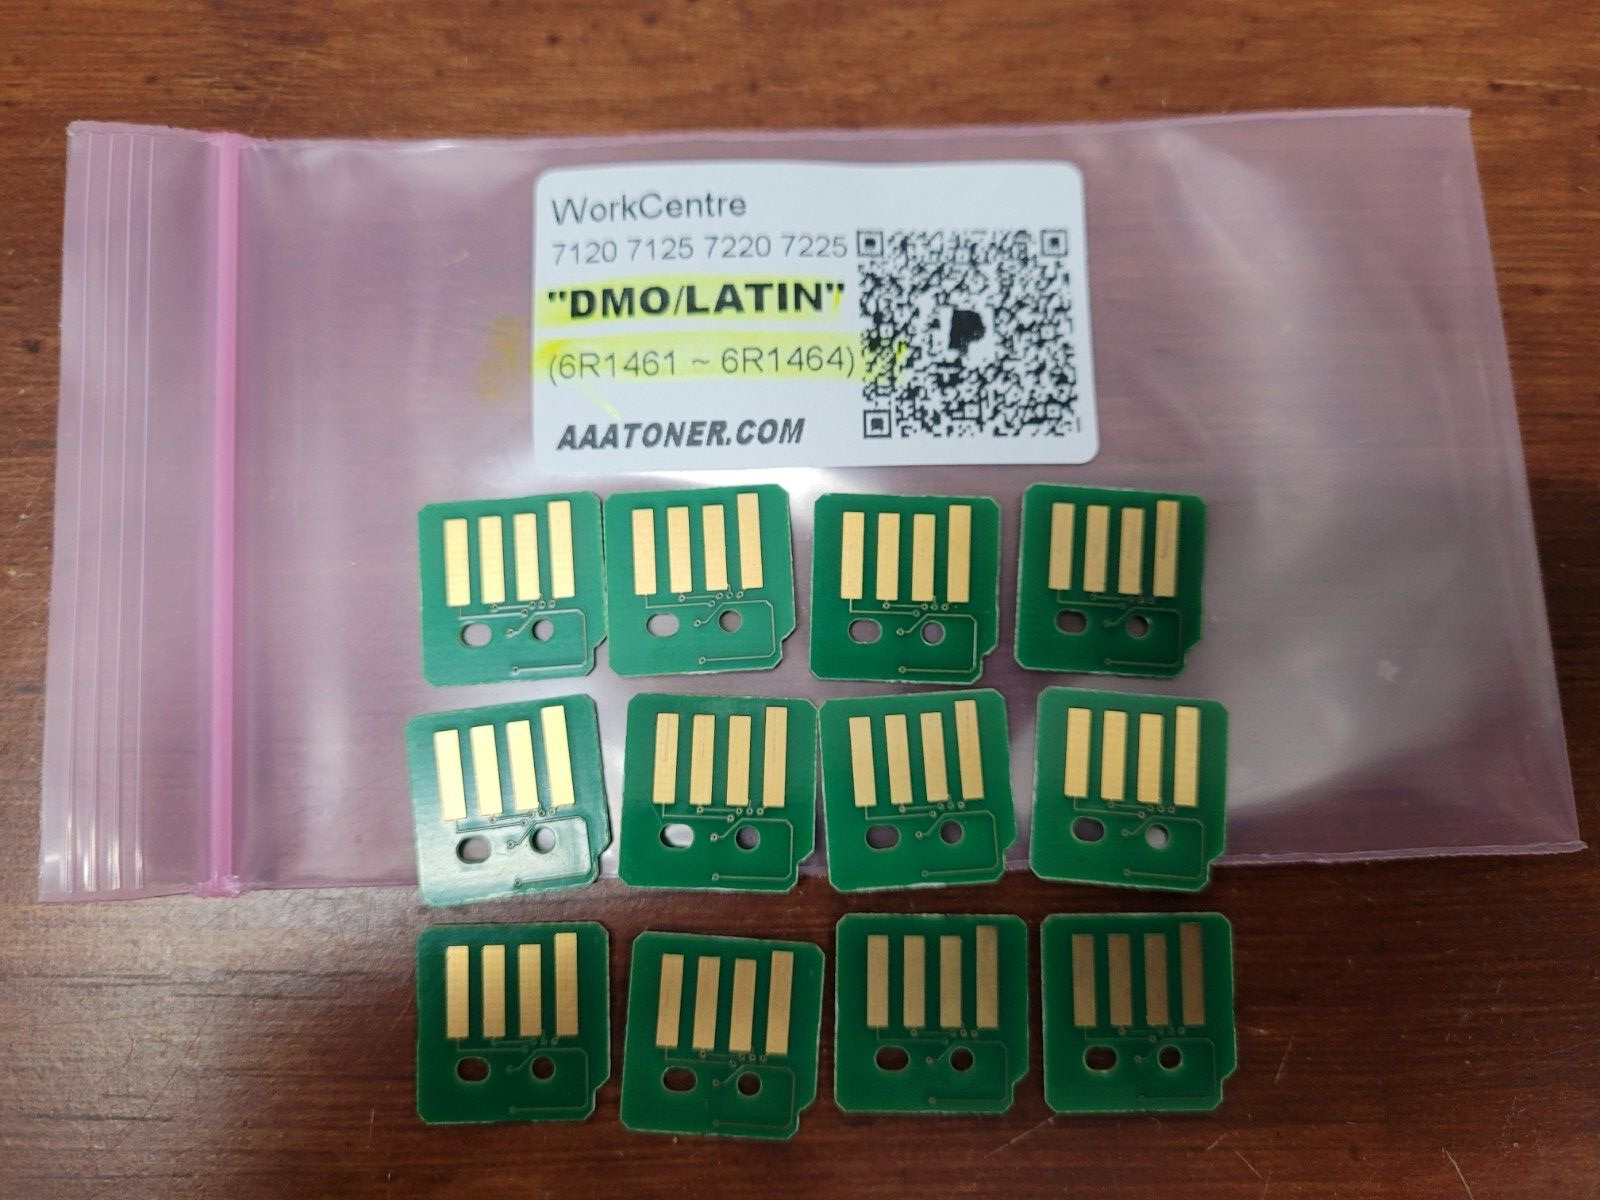 12 Toner Chip for Xerox Workcentre 7120 7125 7220 7225 Refill (1461 - 1464 DMO)